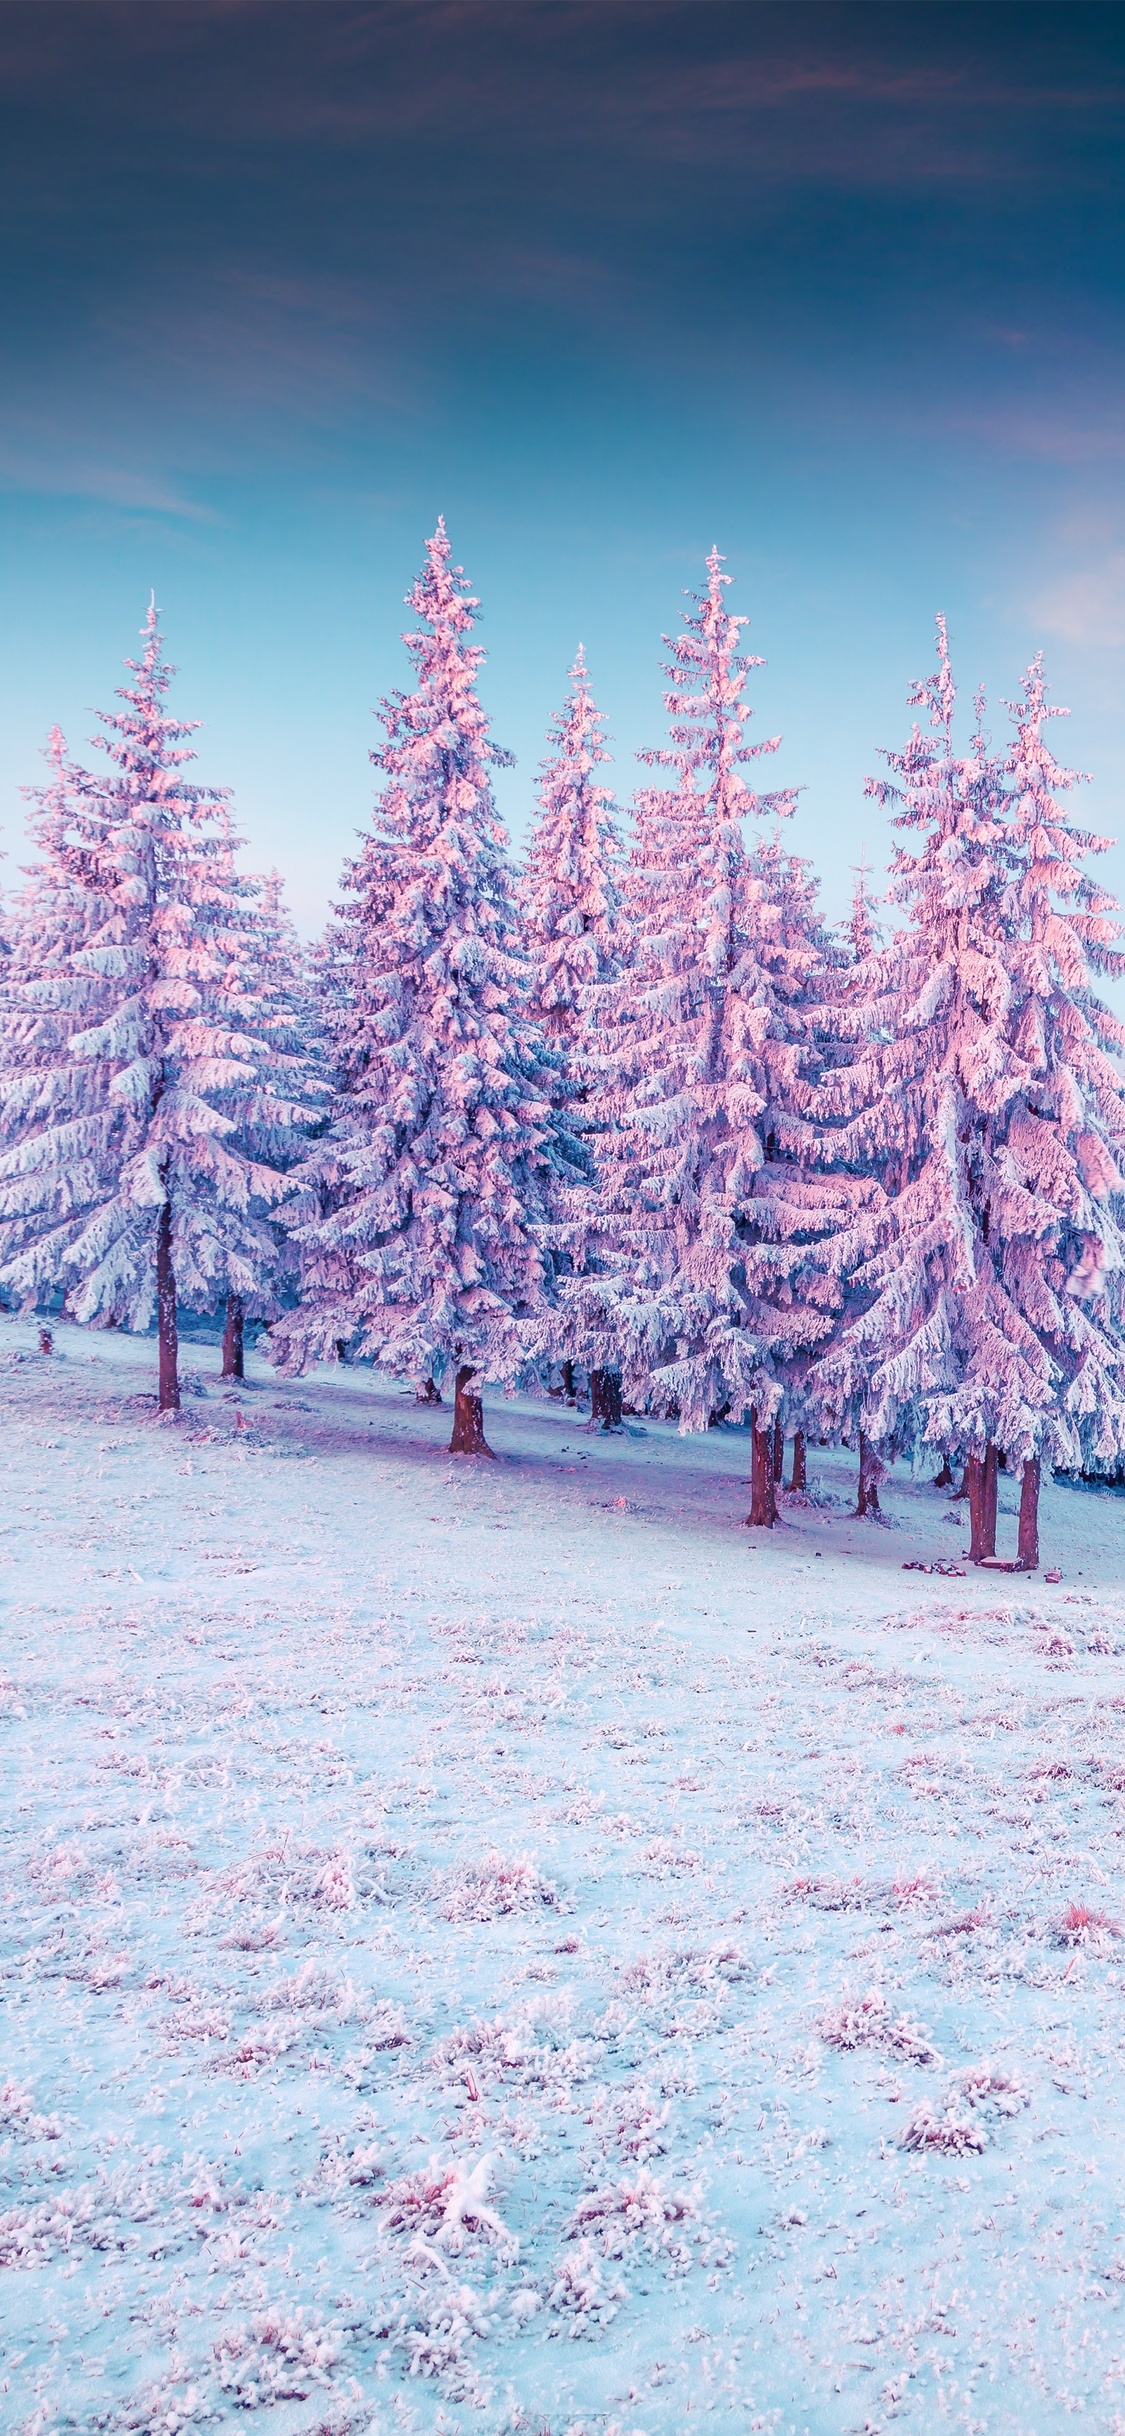 trees-pink-colorful-cold-hills-snow-5k-kq.jpg